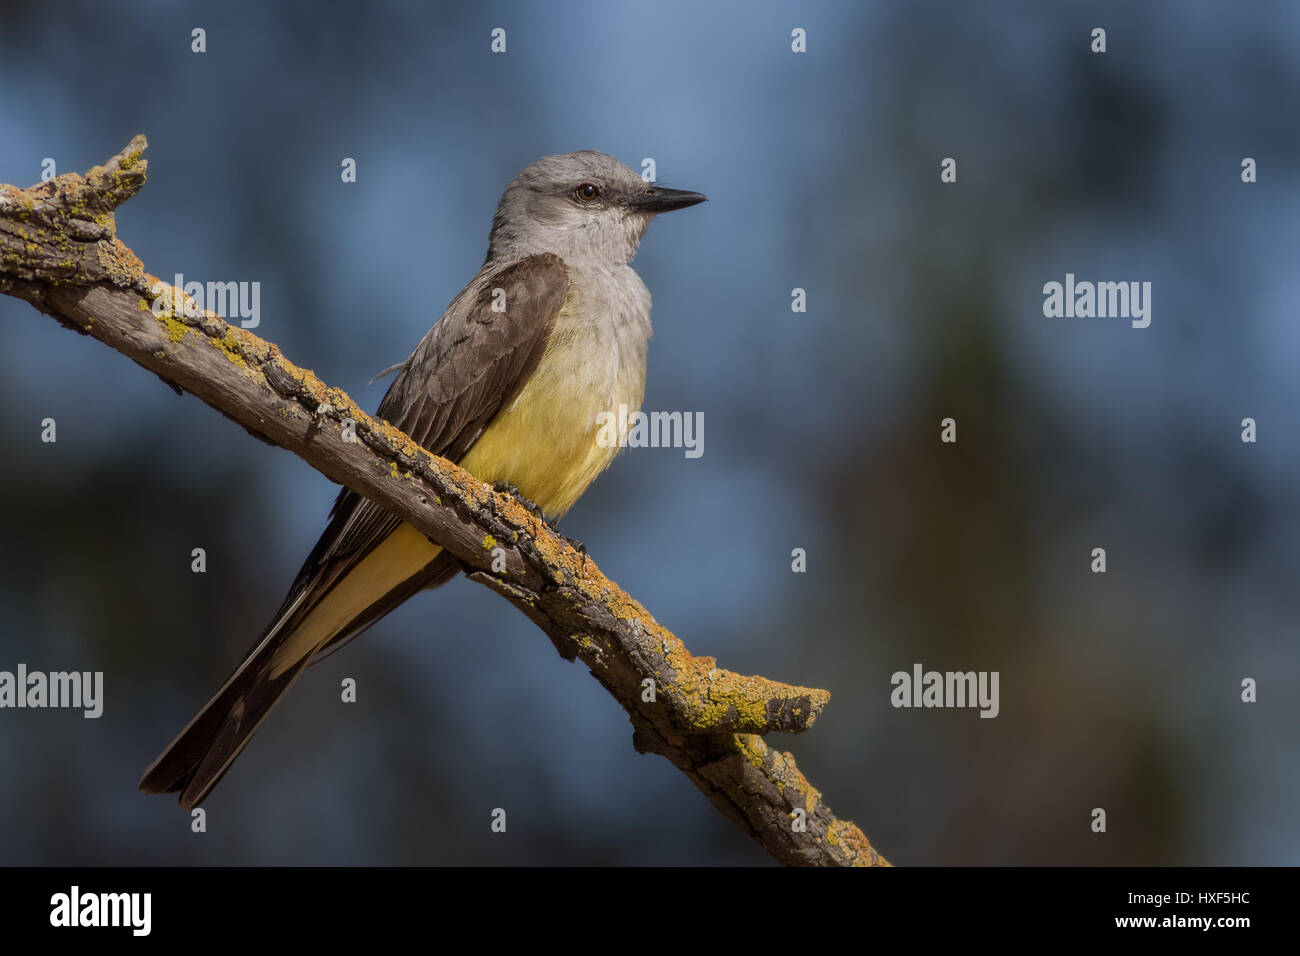 A Western Kingbird takes a break from building its nest to feed on insects from a perch. These stunning birds are spring visitors to the Western US. Stock Photo